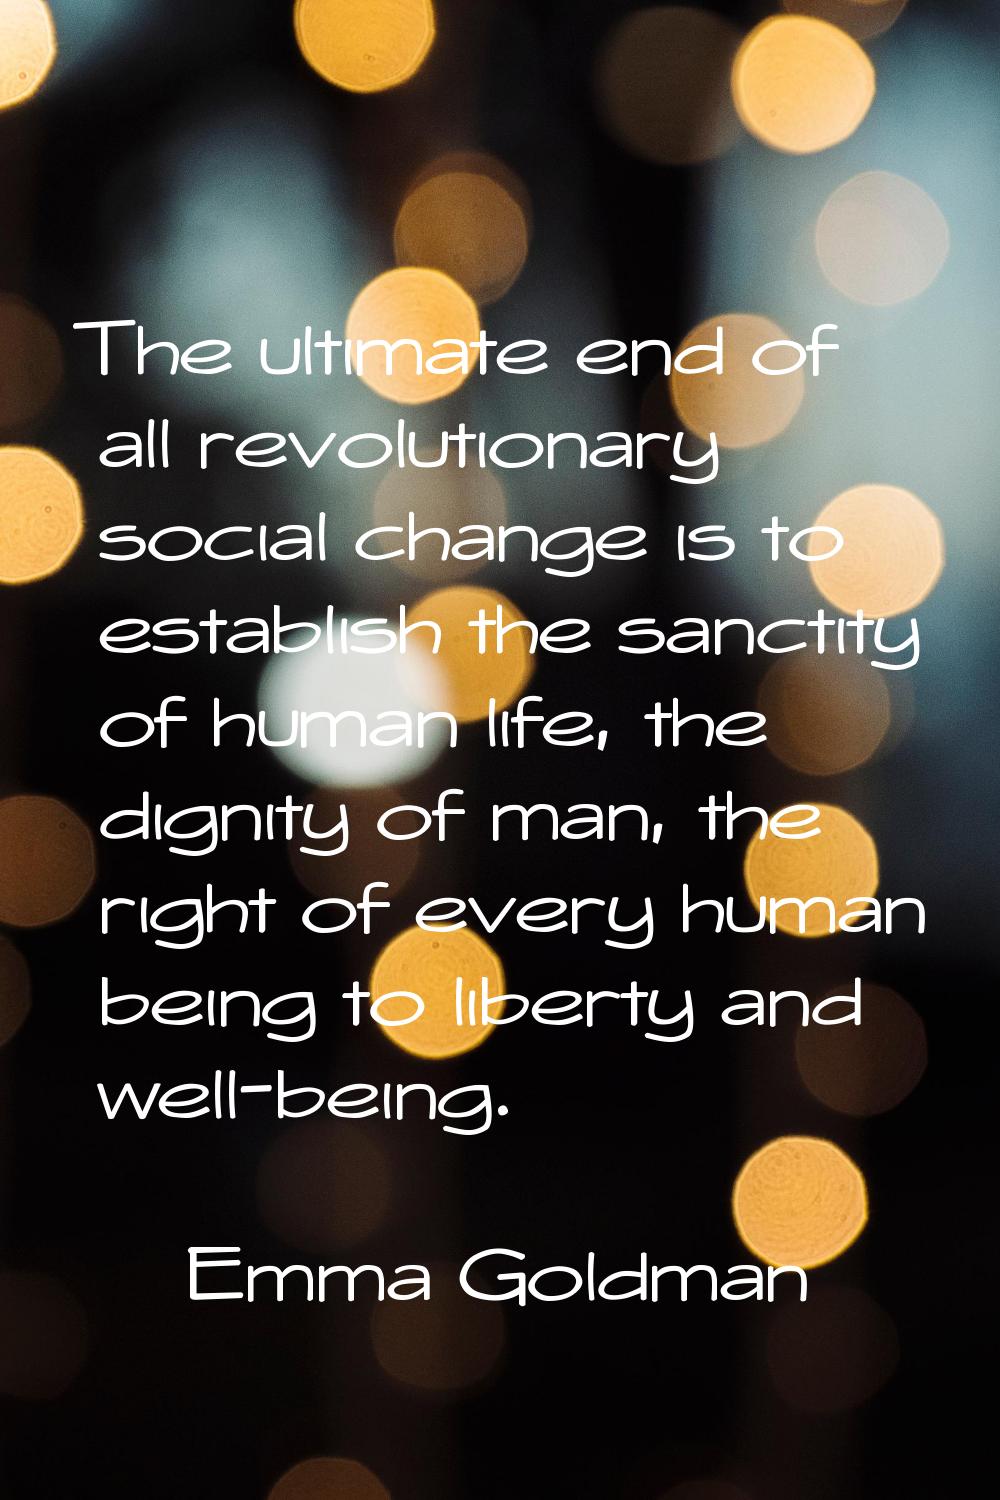 The ultimate end of all revolutionary social change is to establish the sanctity of human life, the